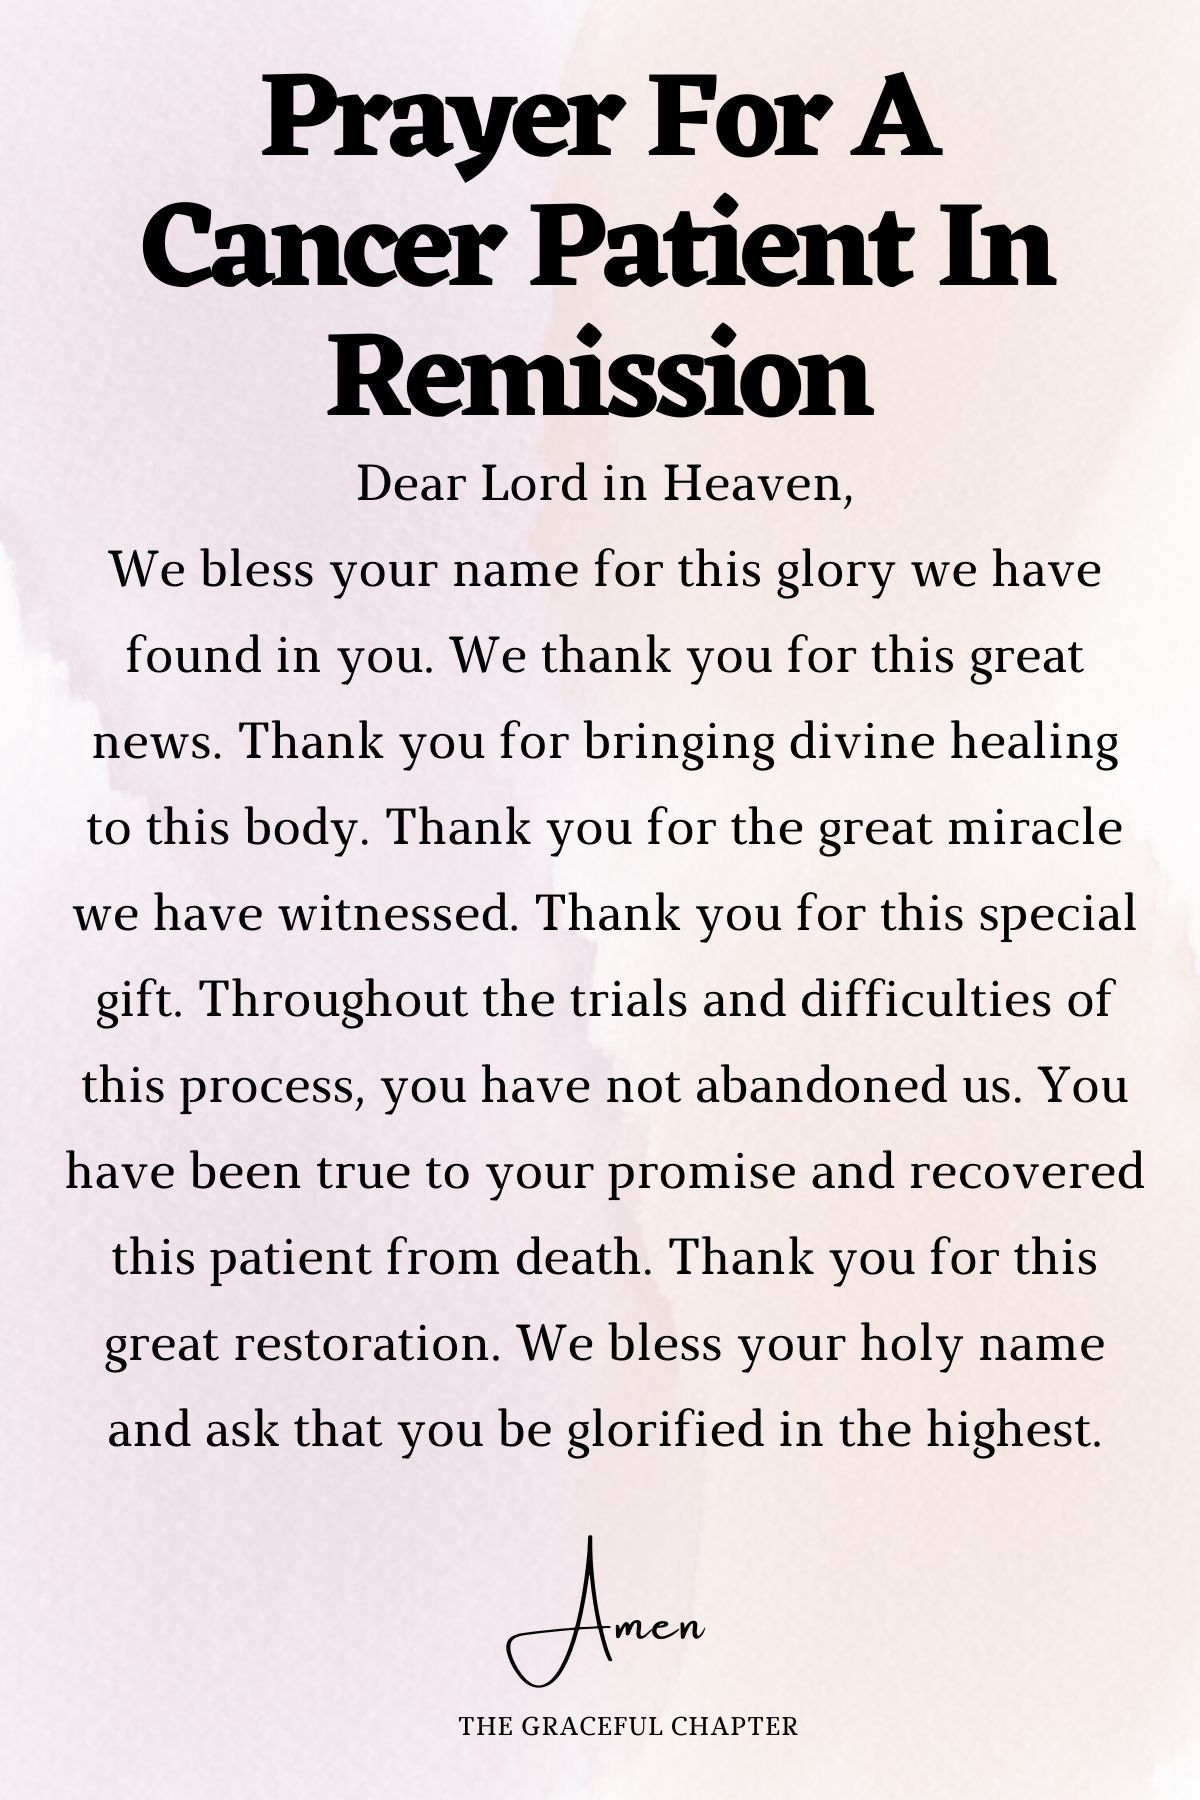 Prayer For A Cancer Patient In Remission